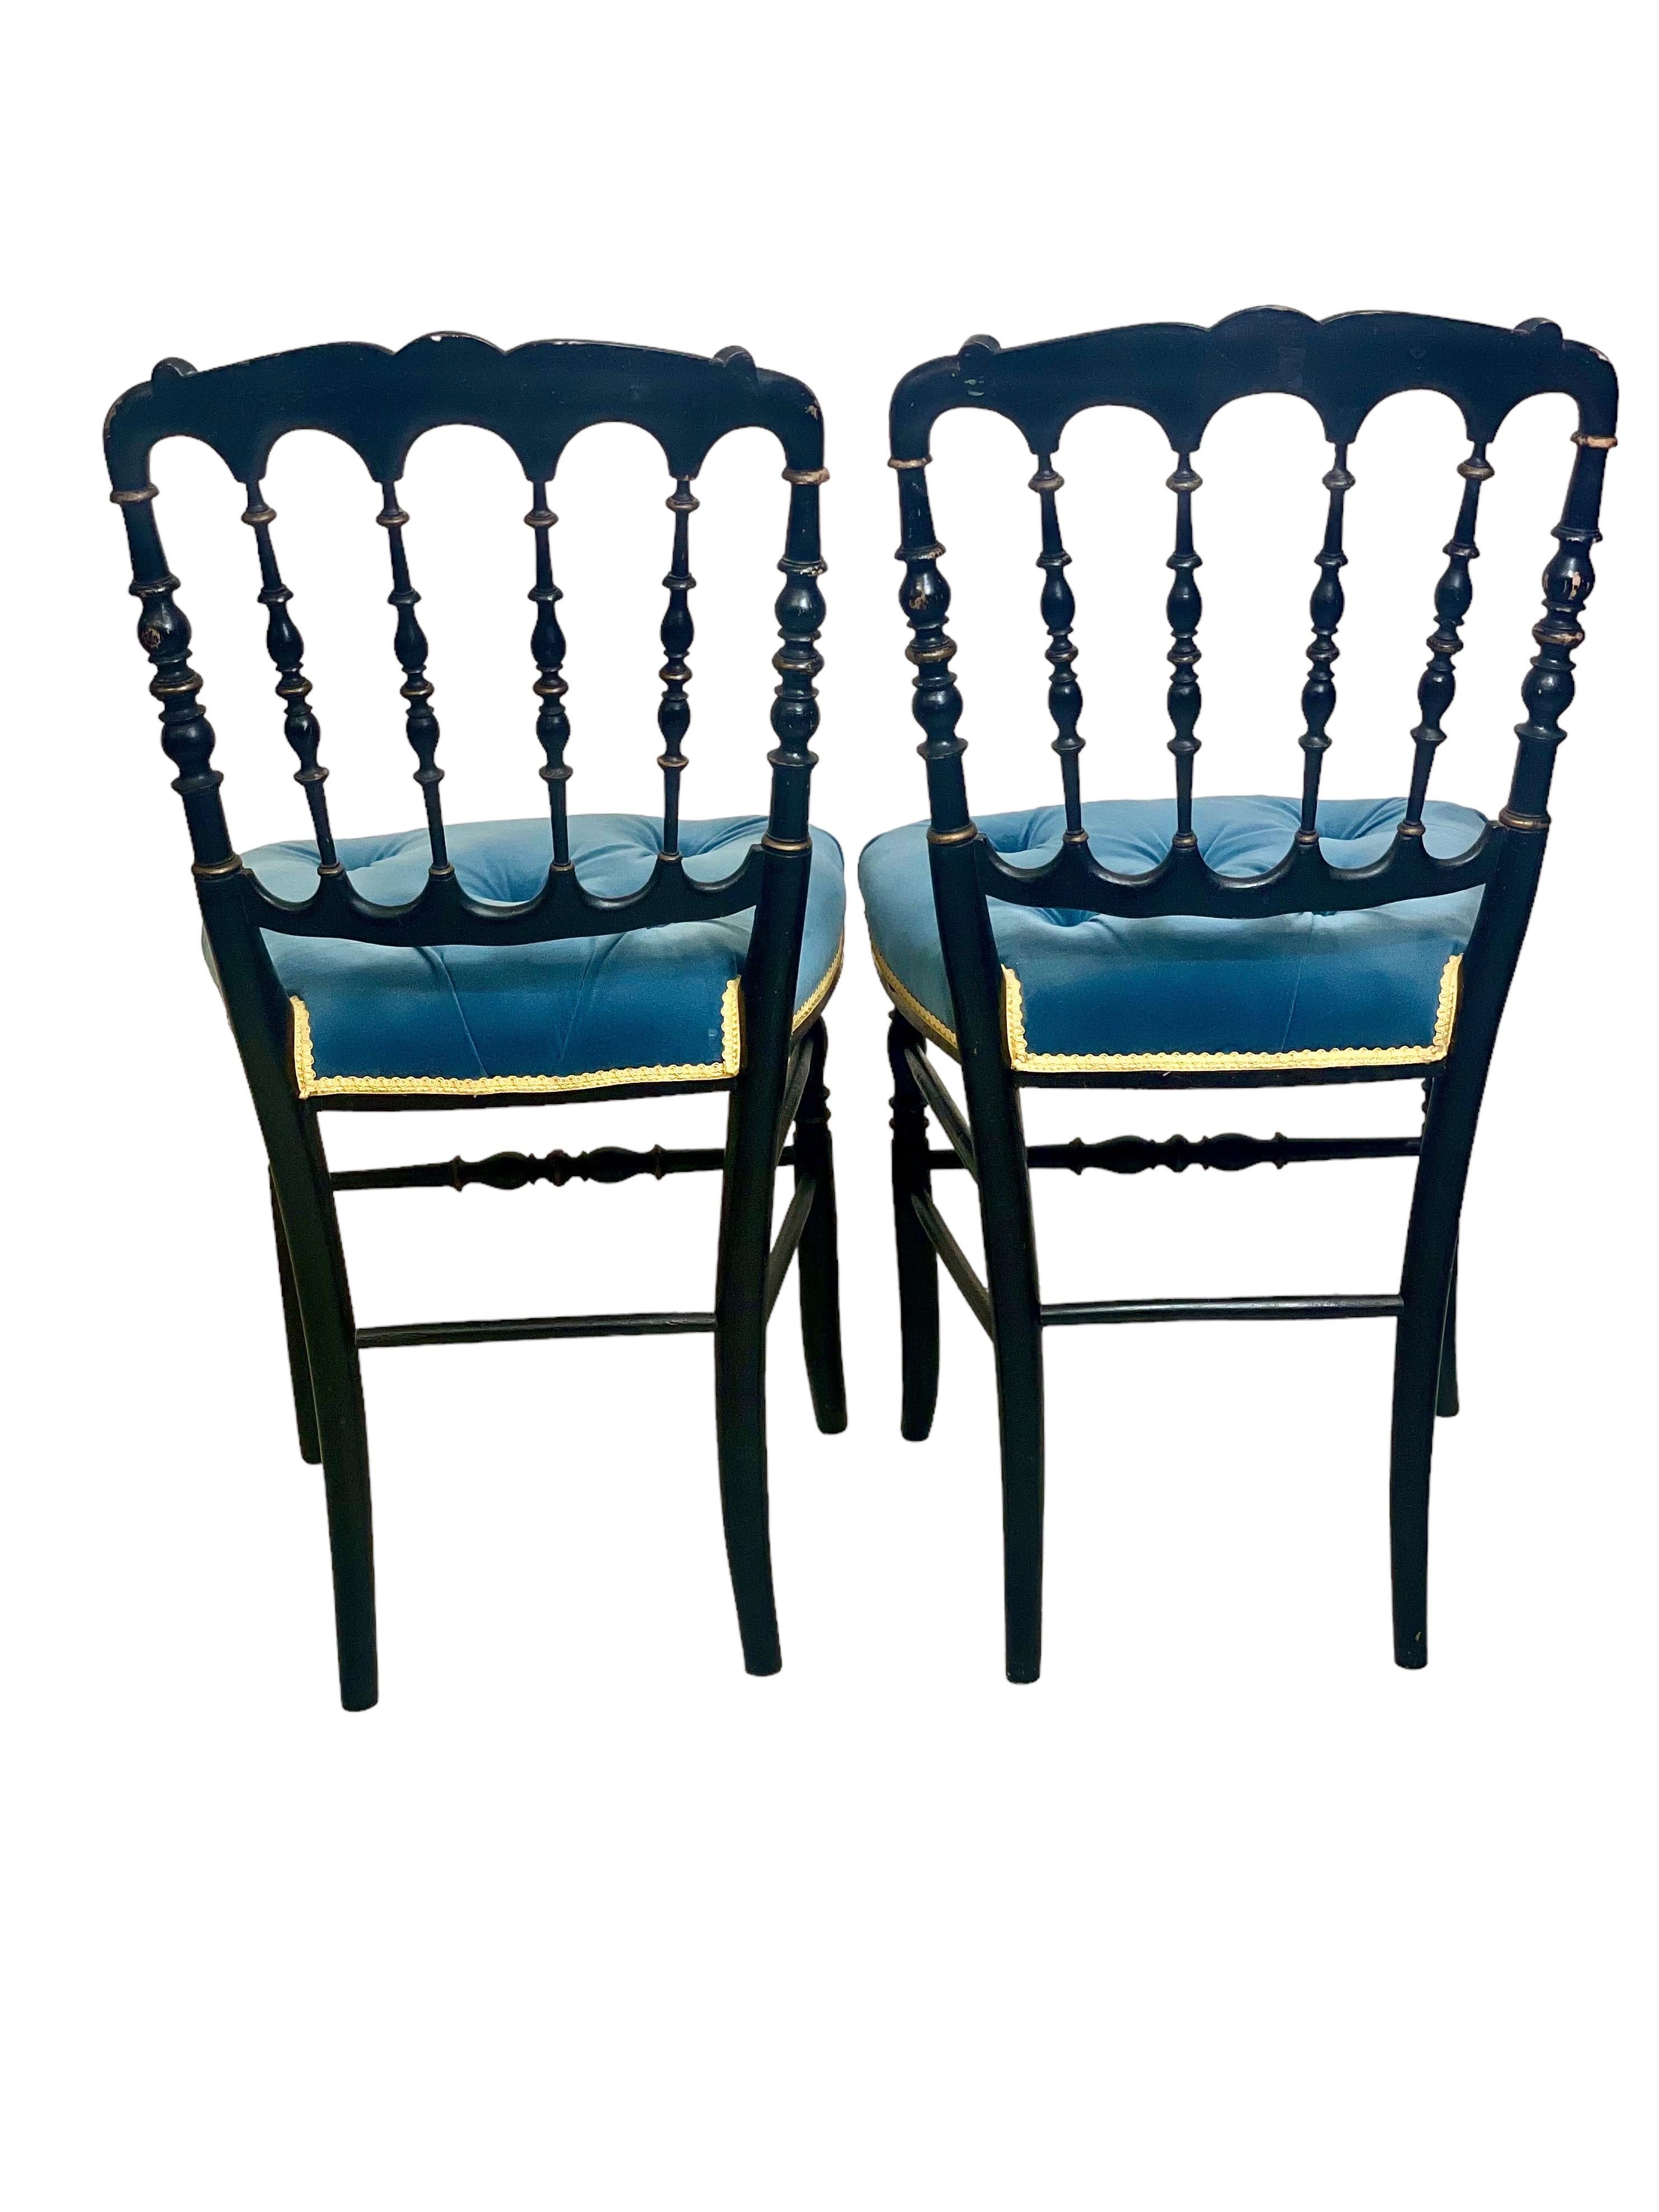 A gorgeous pair of 19th century Napoleon III opera chairs in ebonised wood, each with a wonderfully ornate spindle back and a gilded decoration of flowers and foliage on the top rail. A comfortable tufted seat in blue velvet is bound all round with